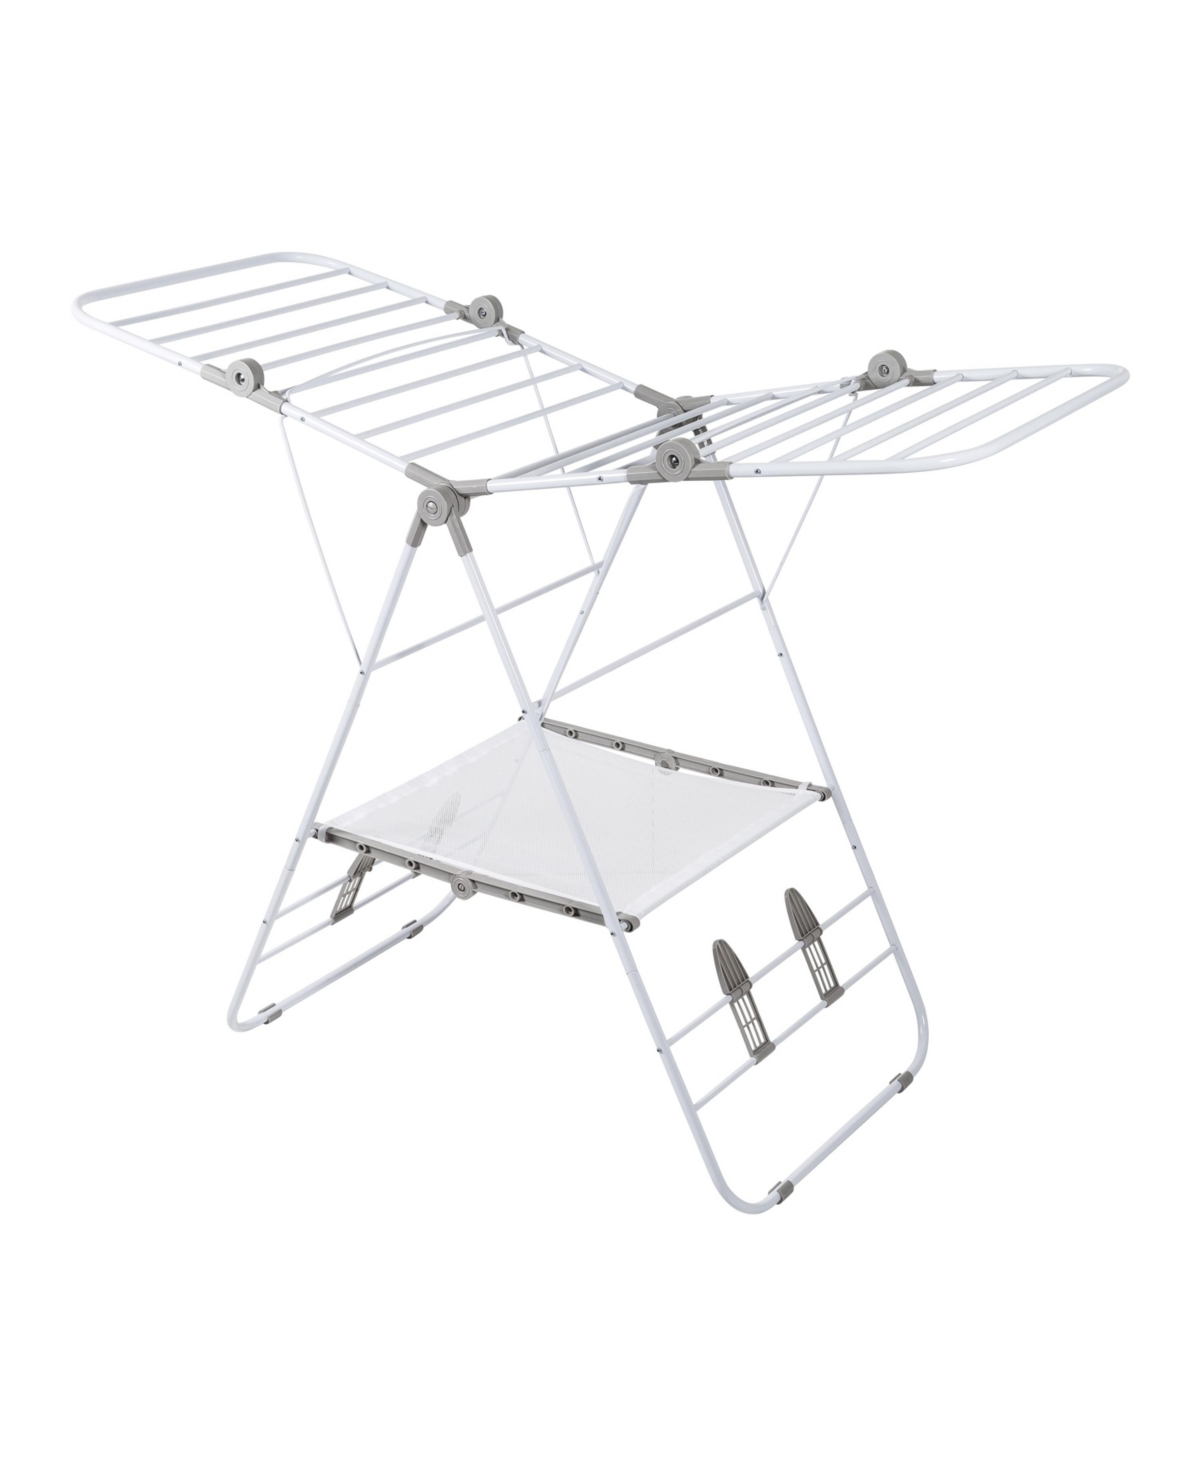 Large Expandable and Collapsible Gullwing Clothes Drying Rack - White